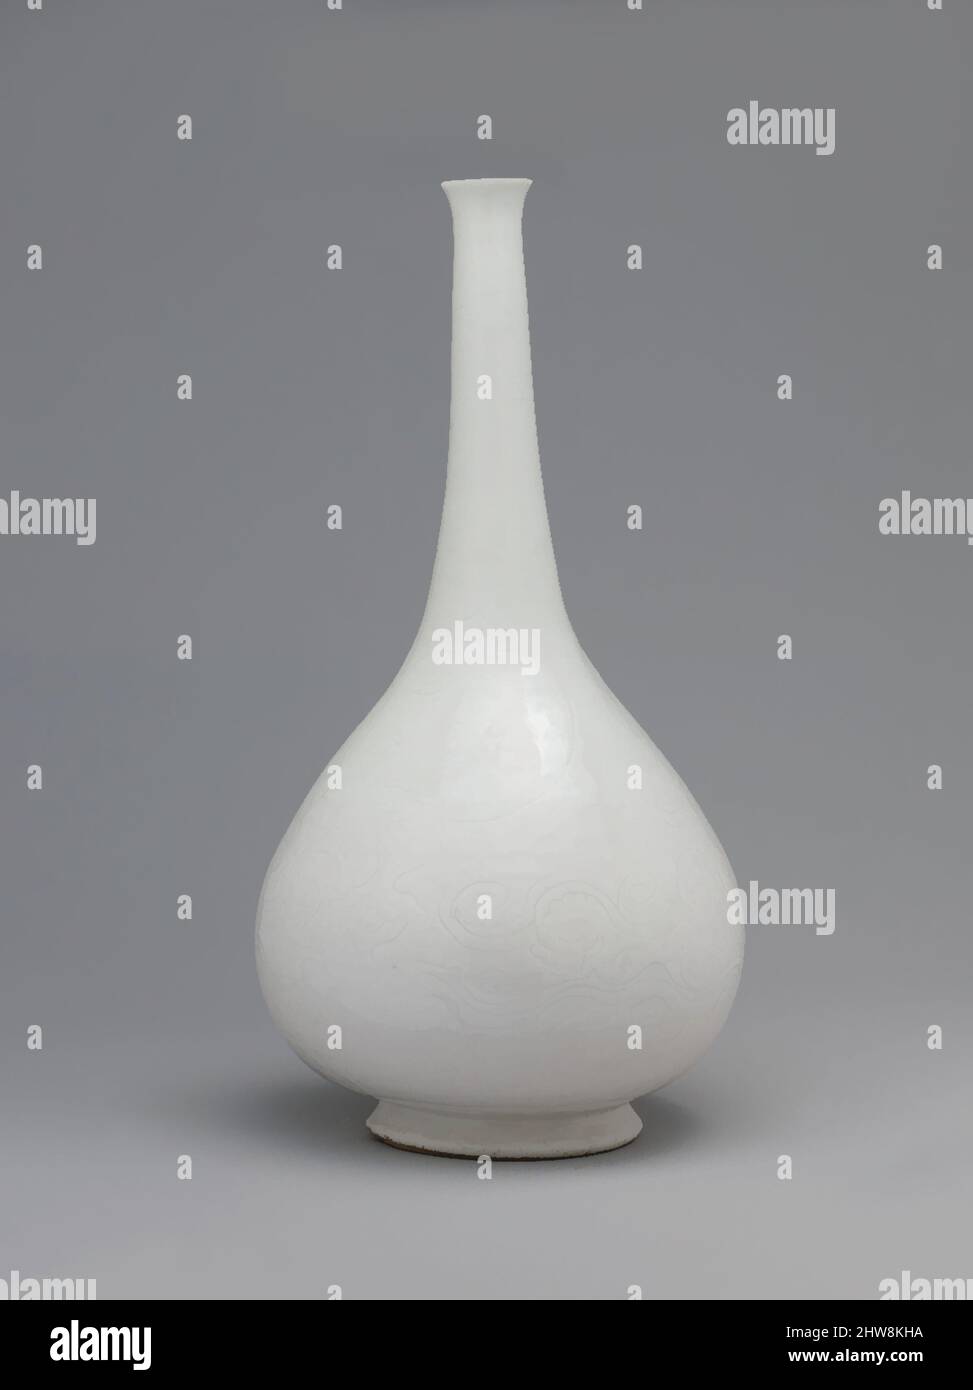 Art inspired by Bottle with Incised Decoration, first half 18th century, Made in Iran, Stonepaste; incised under transparent glaze (Gombroon ware), H. 14 in. (35.6 cm), Ceramics, This bottle along with a bowl are part of a group of Iranian ceramics known as Gombroon ware, named after a, Classic works modernized by Artotop with a splash of modernity. Shapes, color and value, eye-catching visual impact on art. Emotions through freedom of artworks in a contemporary way. A timeless message pursuing a wildly creative new direction. Artists turning to the digital medium and creating the Artotop NFT Stock Photo